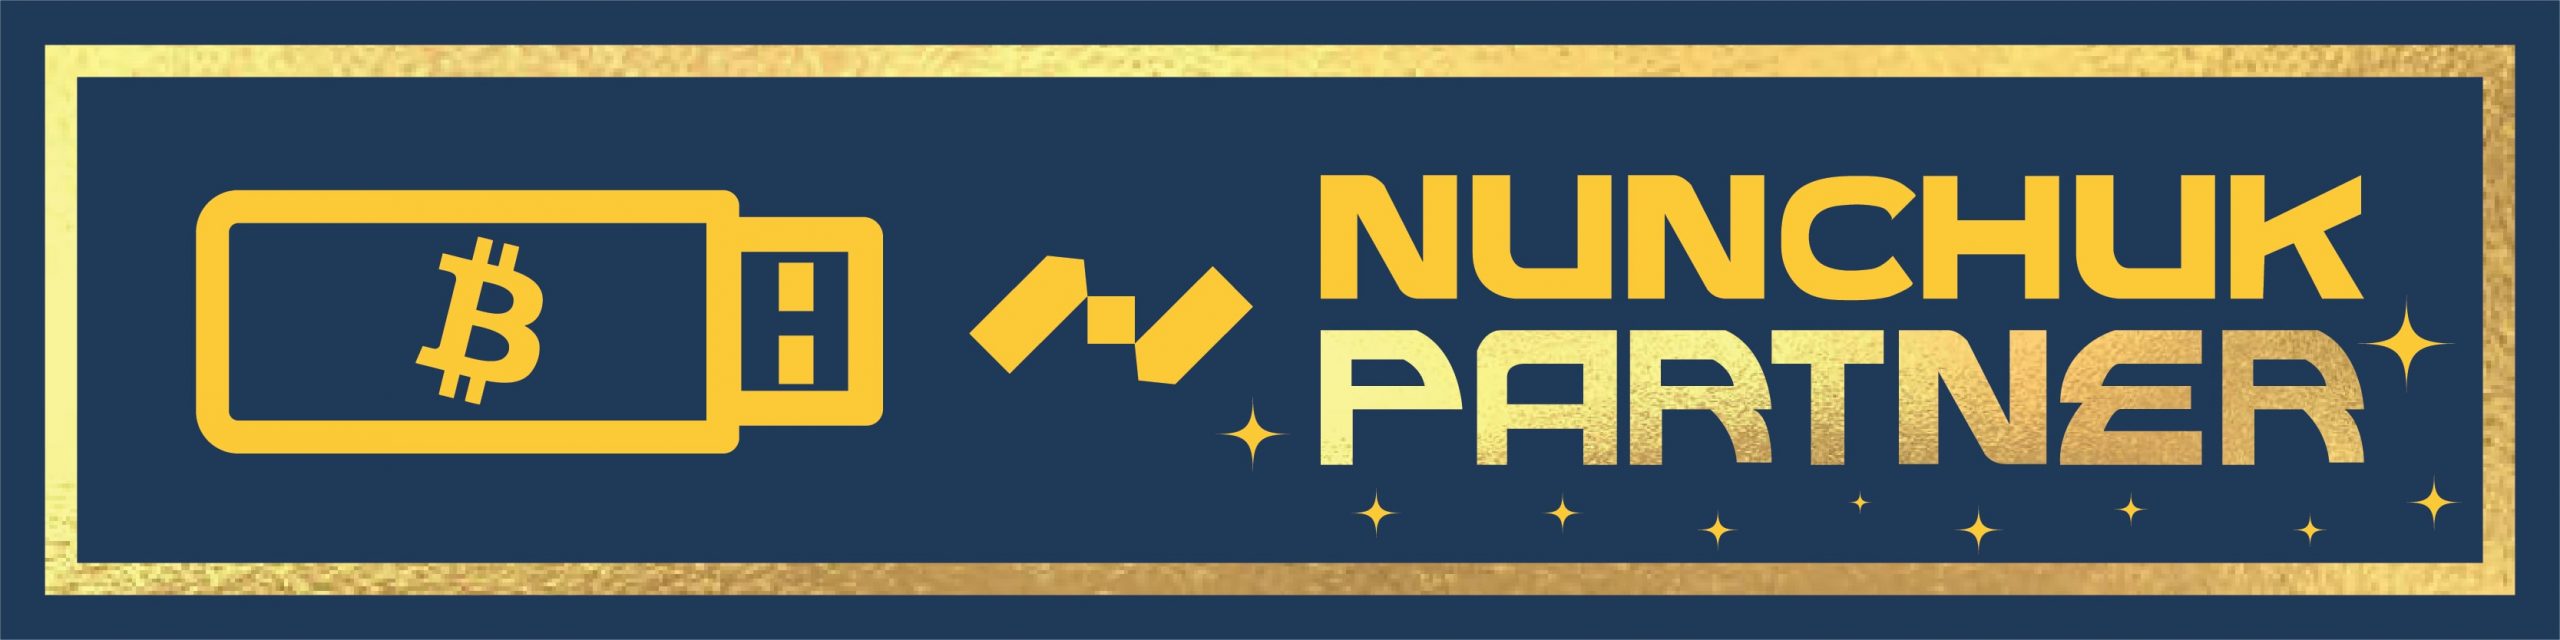 New label “Nunchuk Partner” introduced